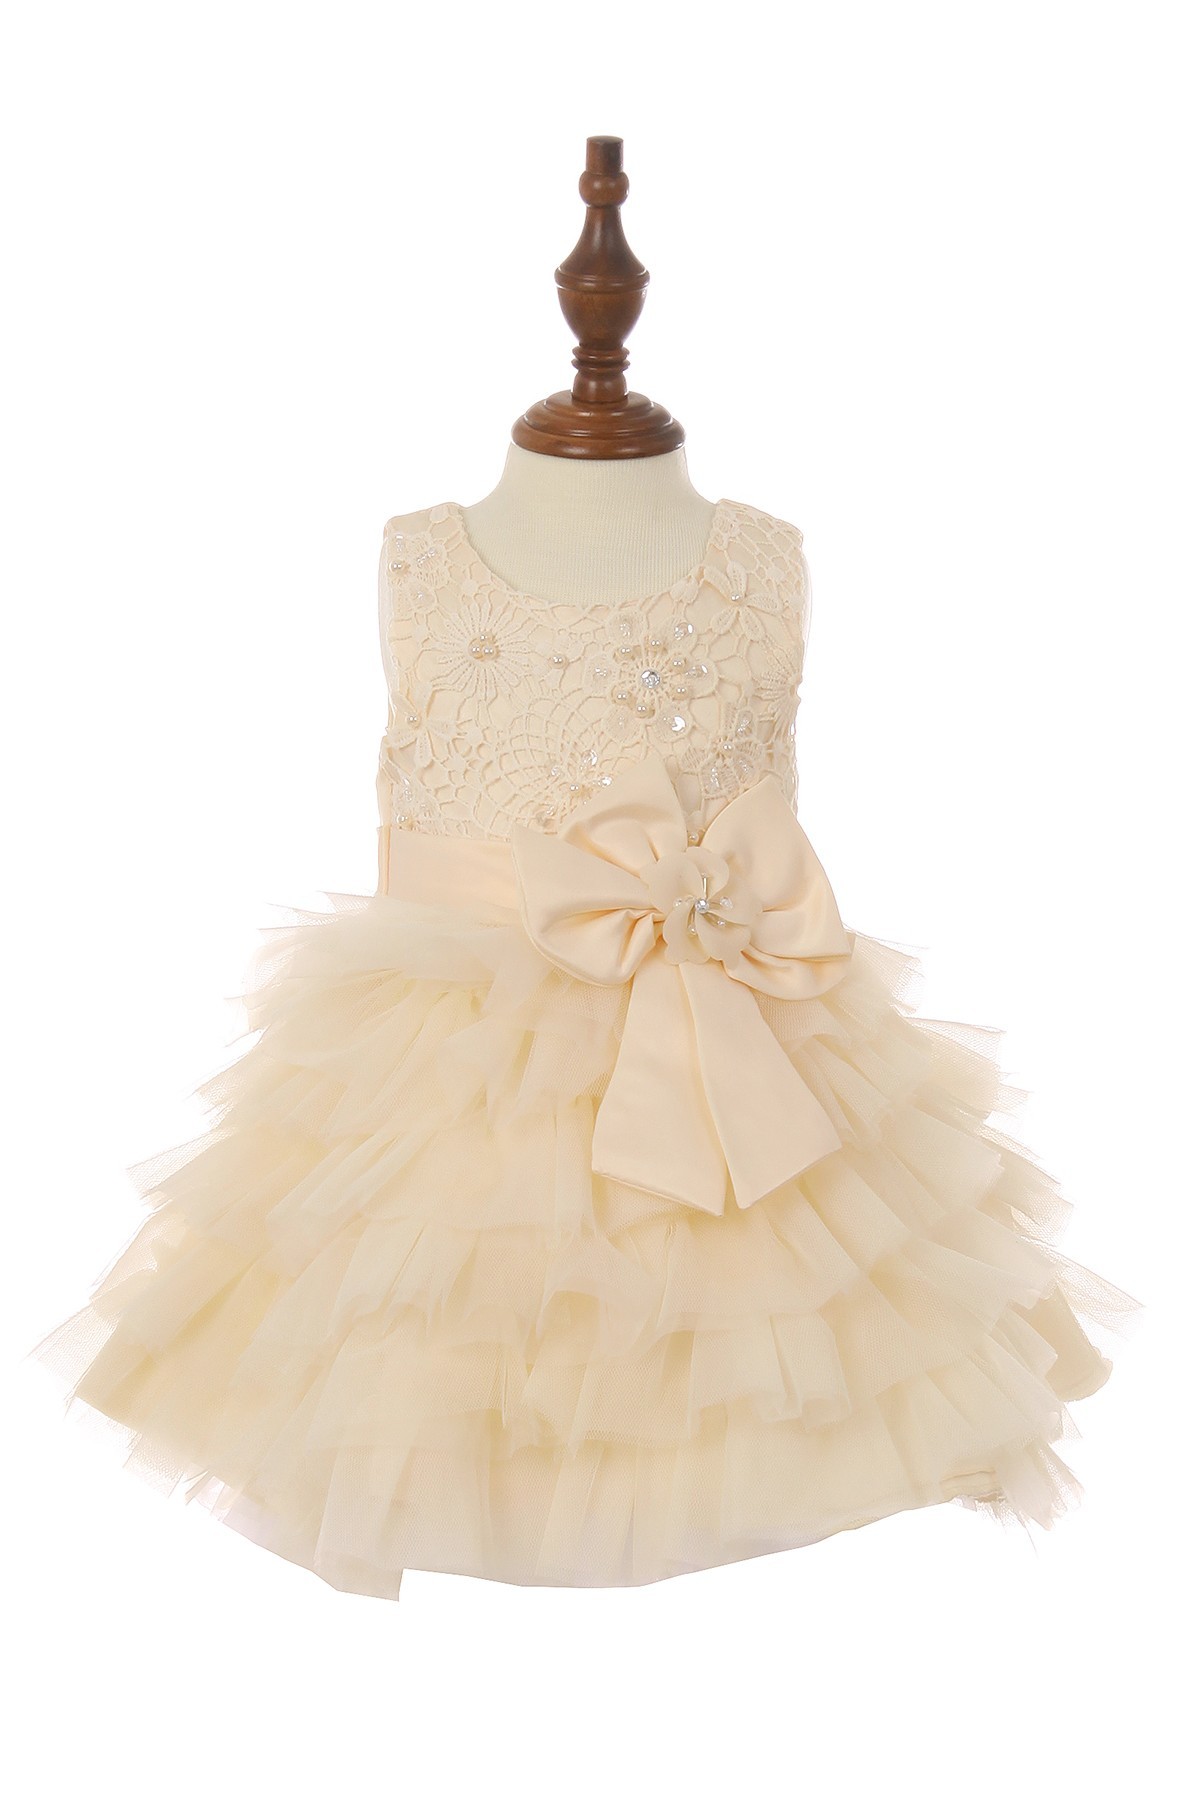 Baby dress with bow, and rows of ruffles